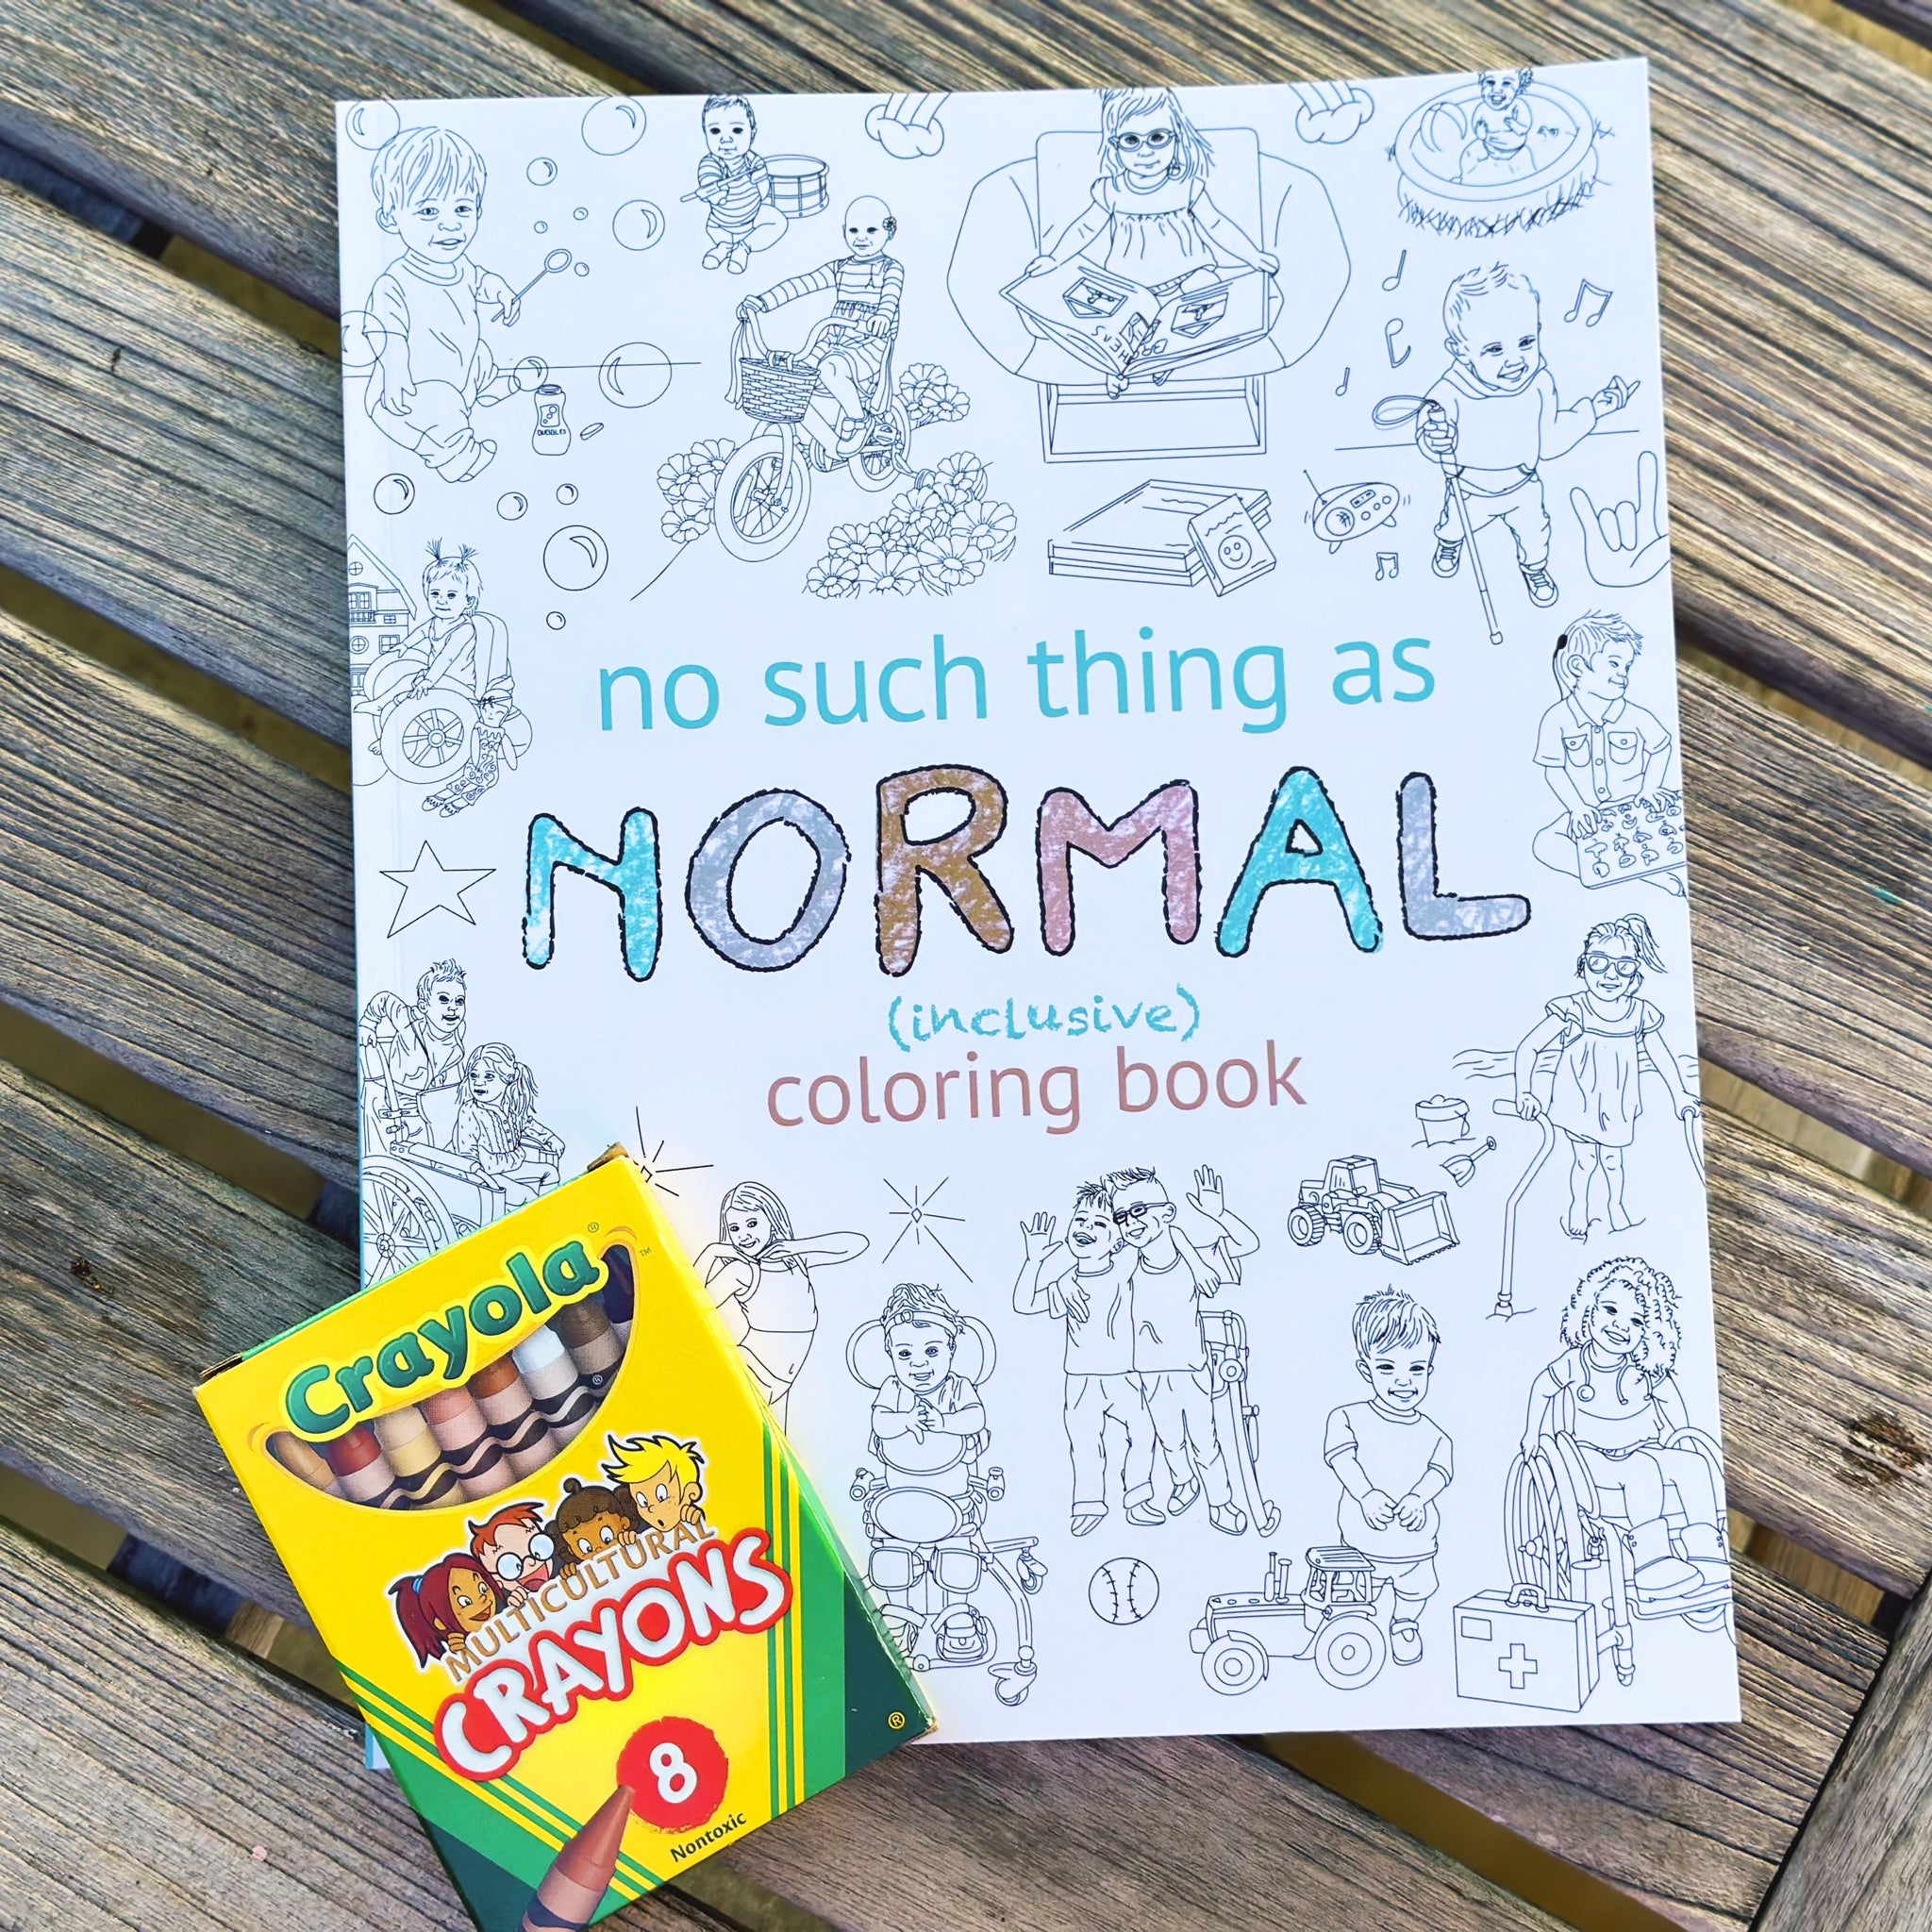 COLORING BOOK & CRAYONS - NO SUCH THING AS NORMAL